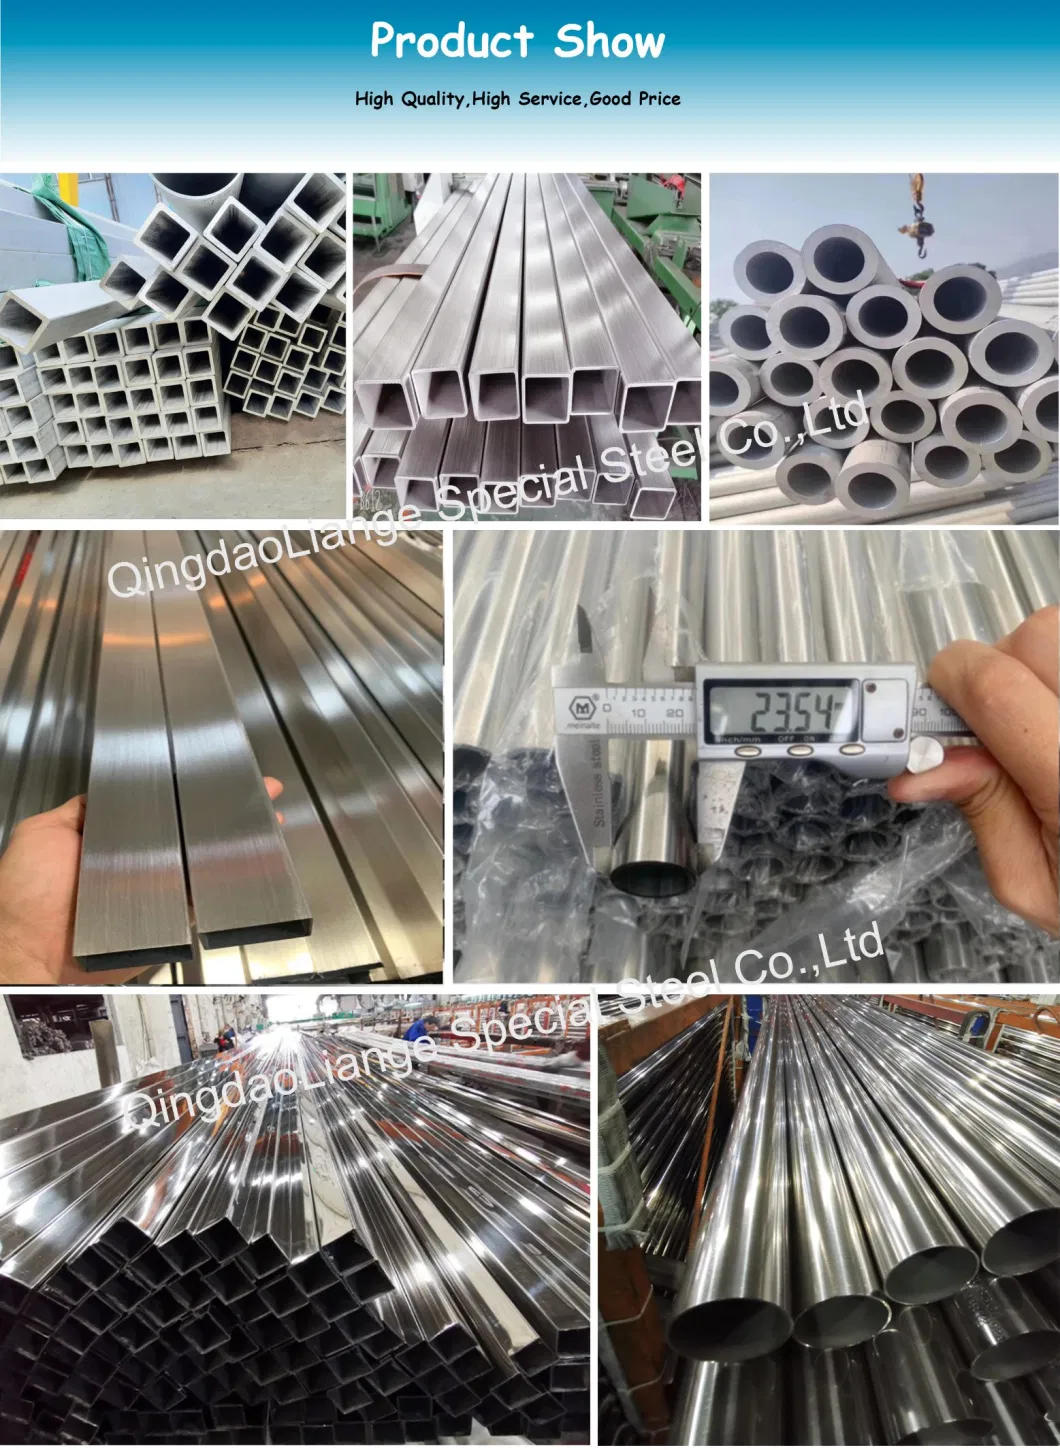 Ss Inox 201 304 316L 310 310S 904L SUS420J2 TP304 S31804 347 904 2205 2507 317 321 Bright Welded Seamless Stainless Box Square Shs Rhs Steel Tube Pipe